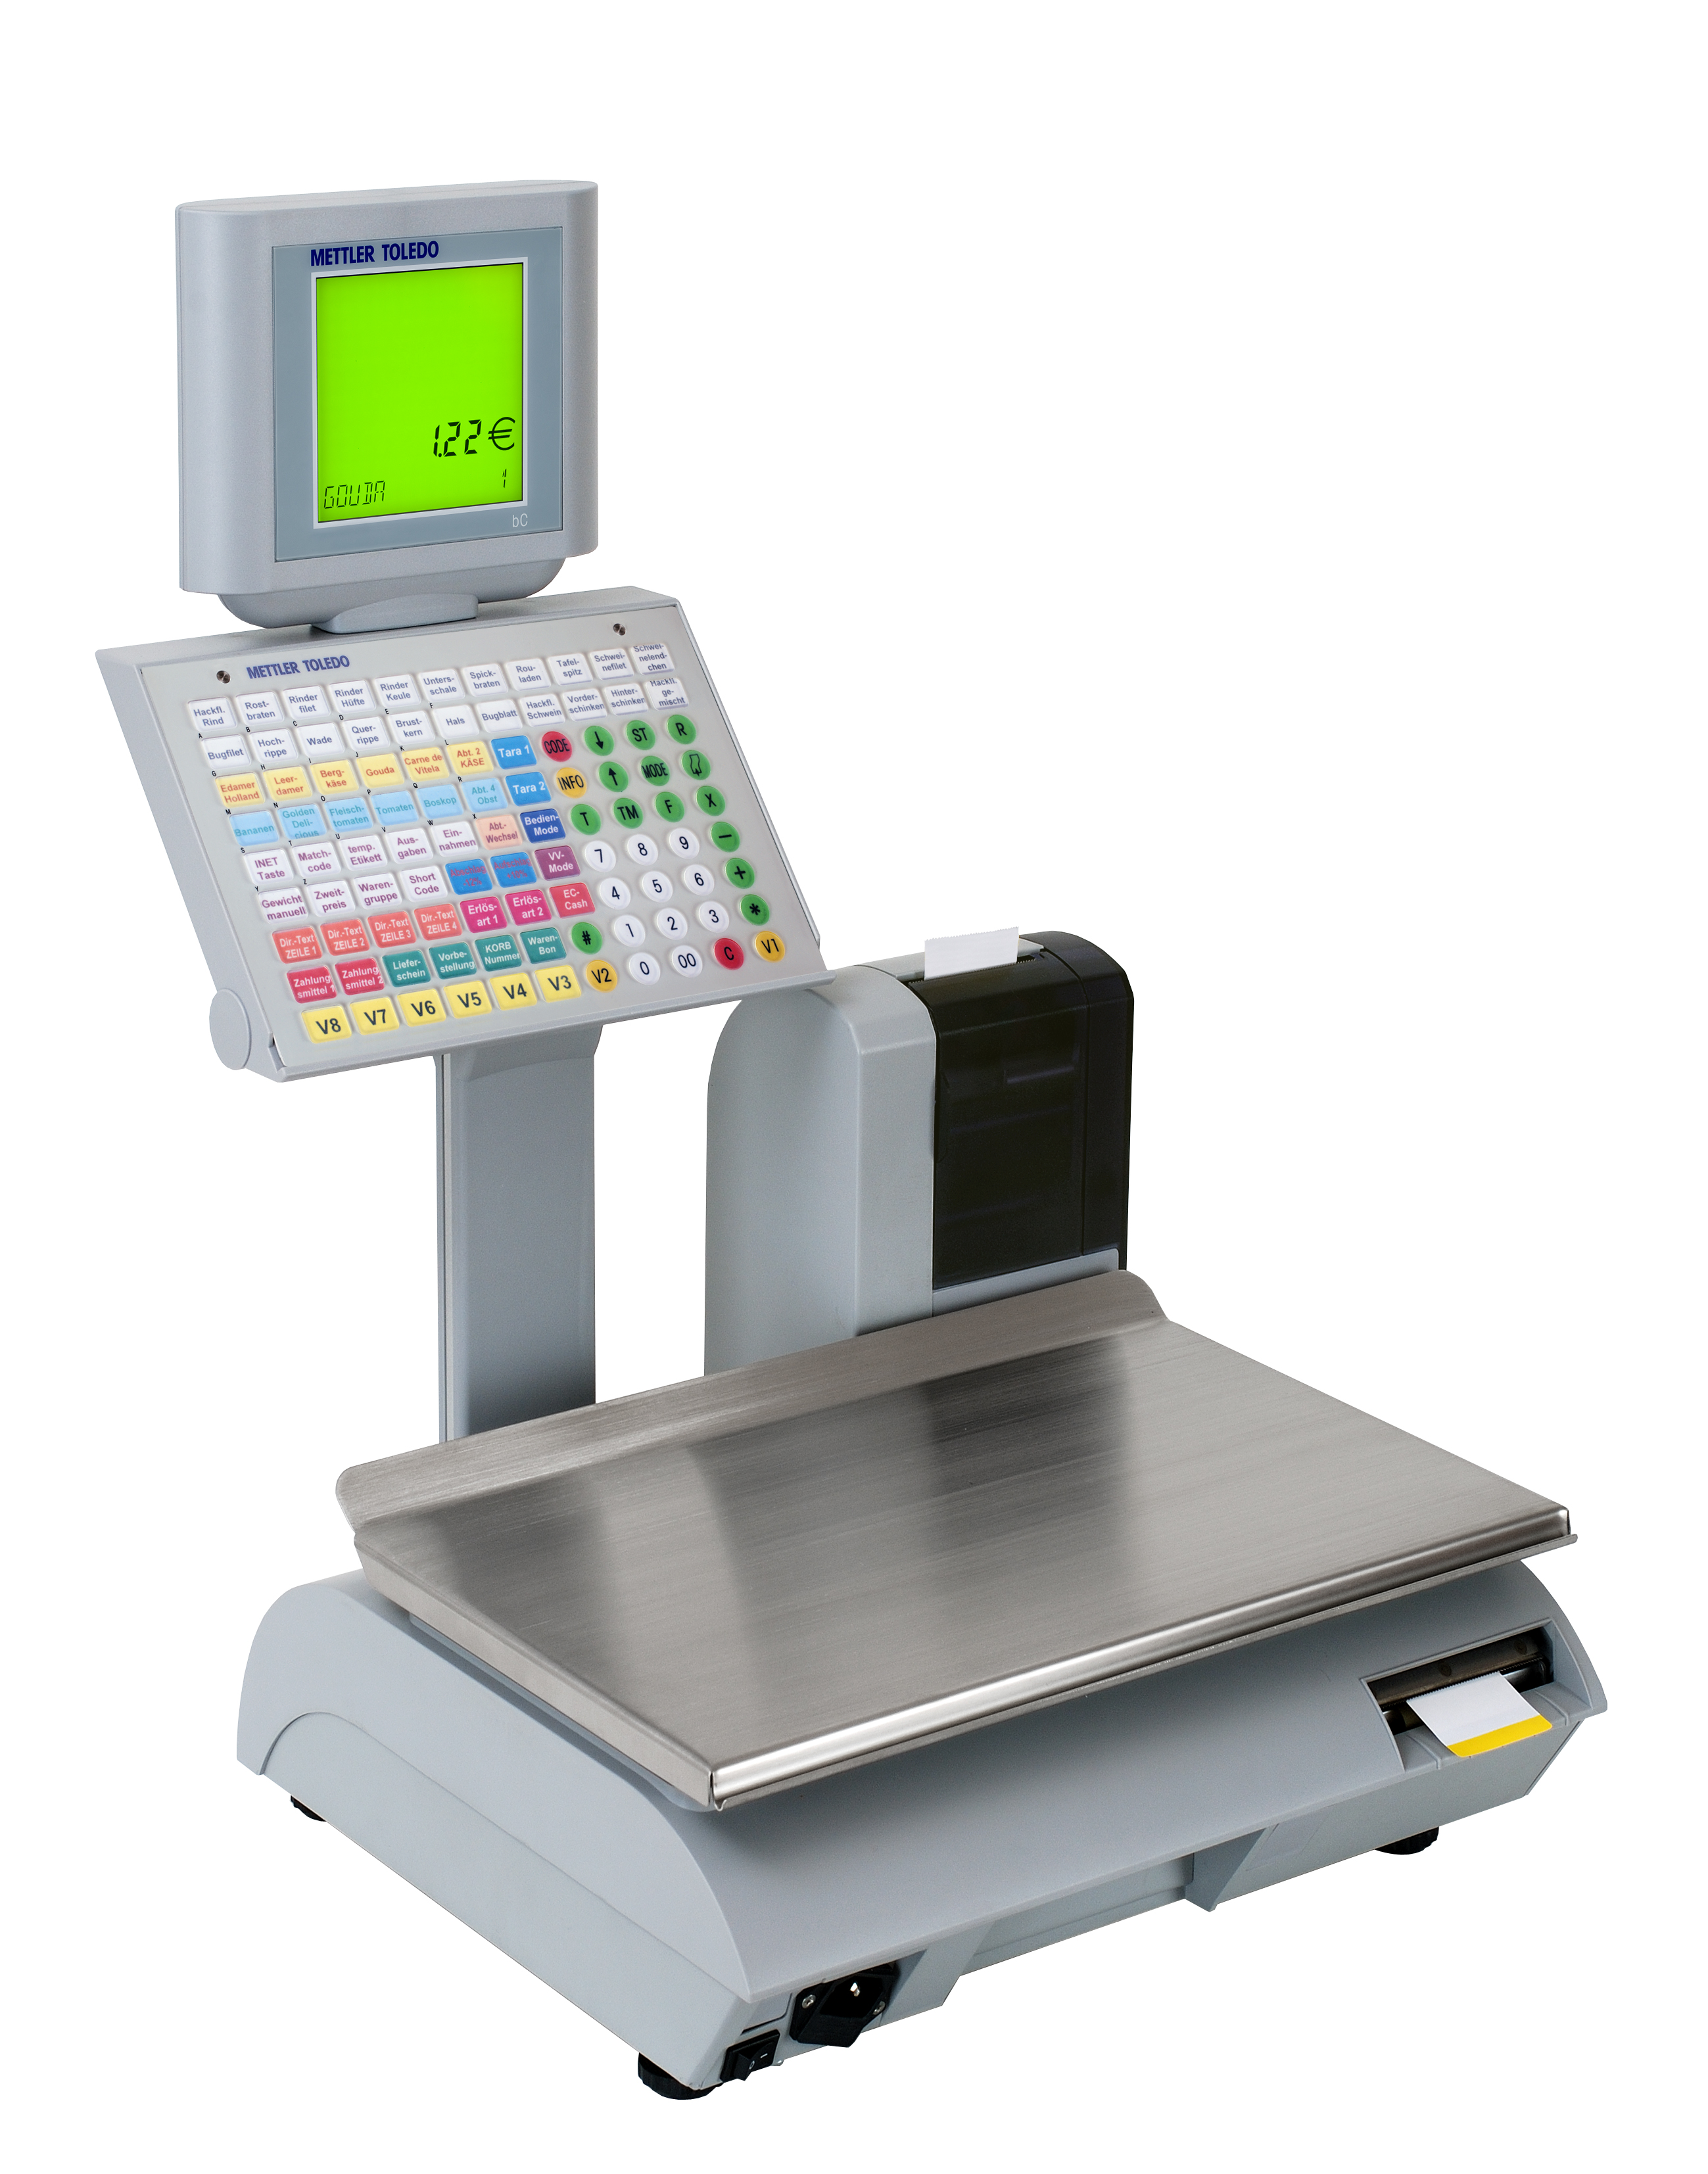 EuroCIS 2009: One device - double benefit: Counter scales bC-U2 with